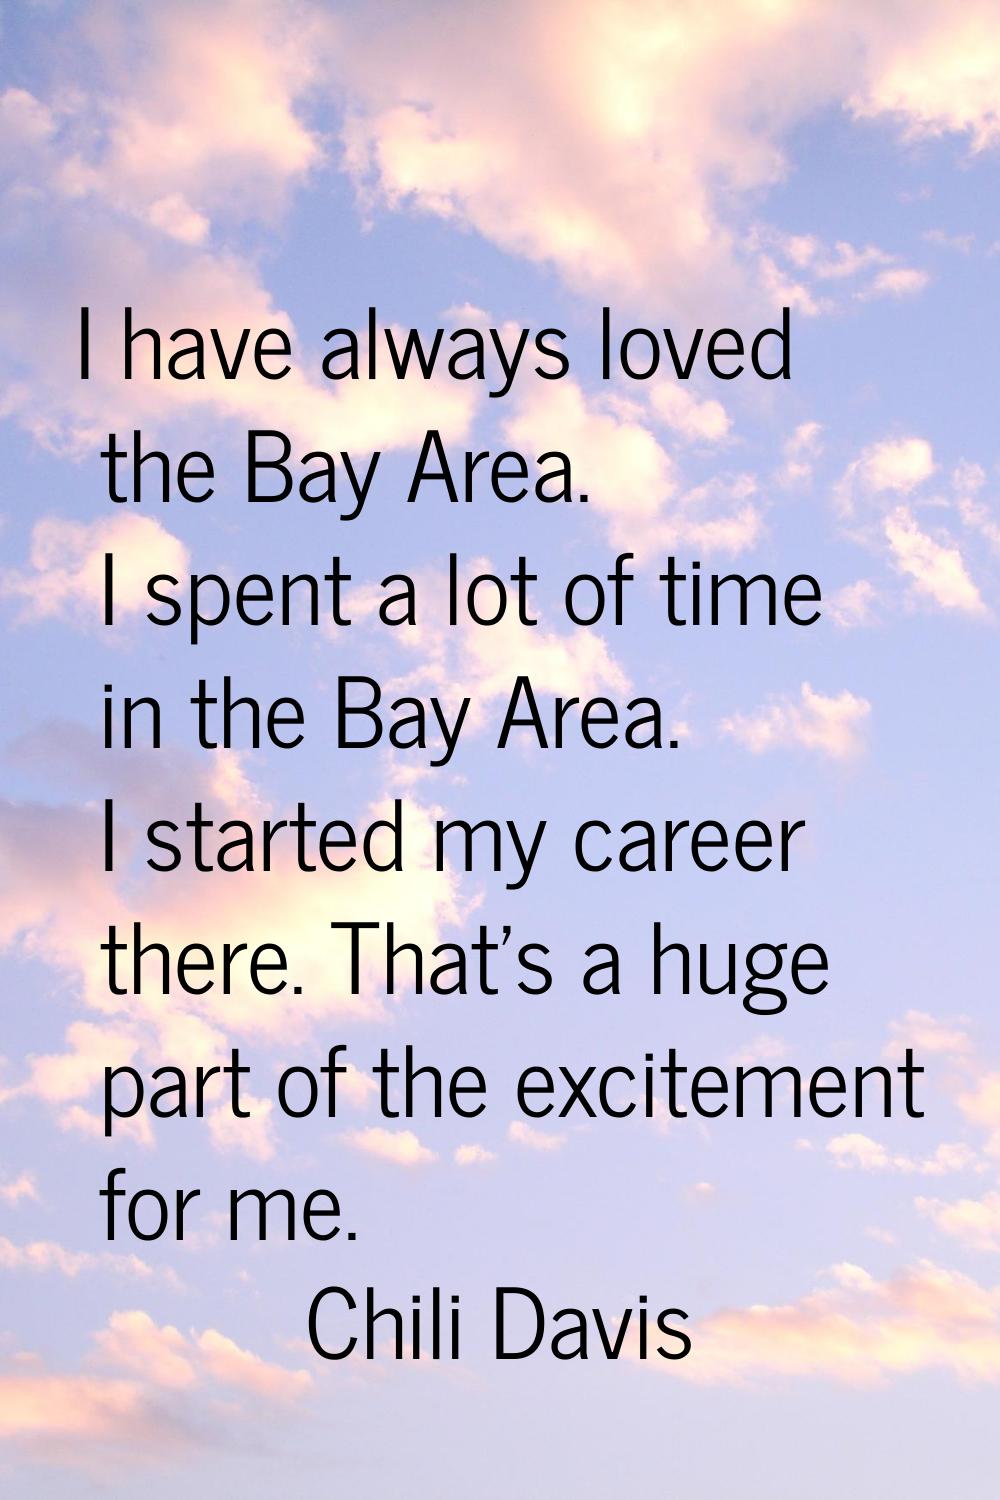 I have always loved the Bay Area. I spent a lot of time in the Bay Area. I started my career there.